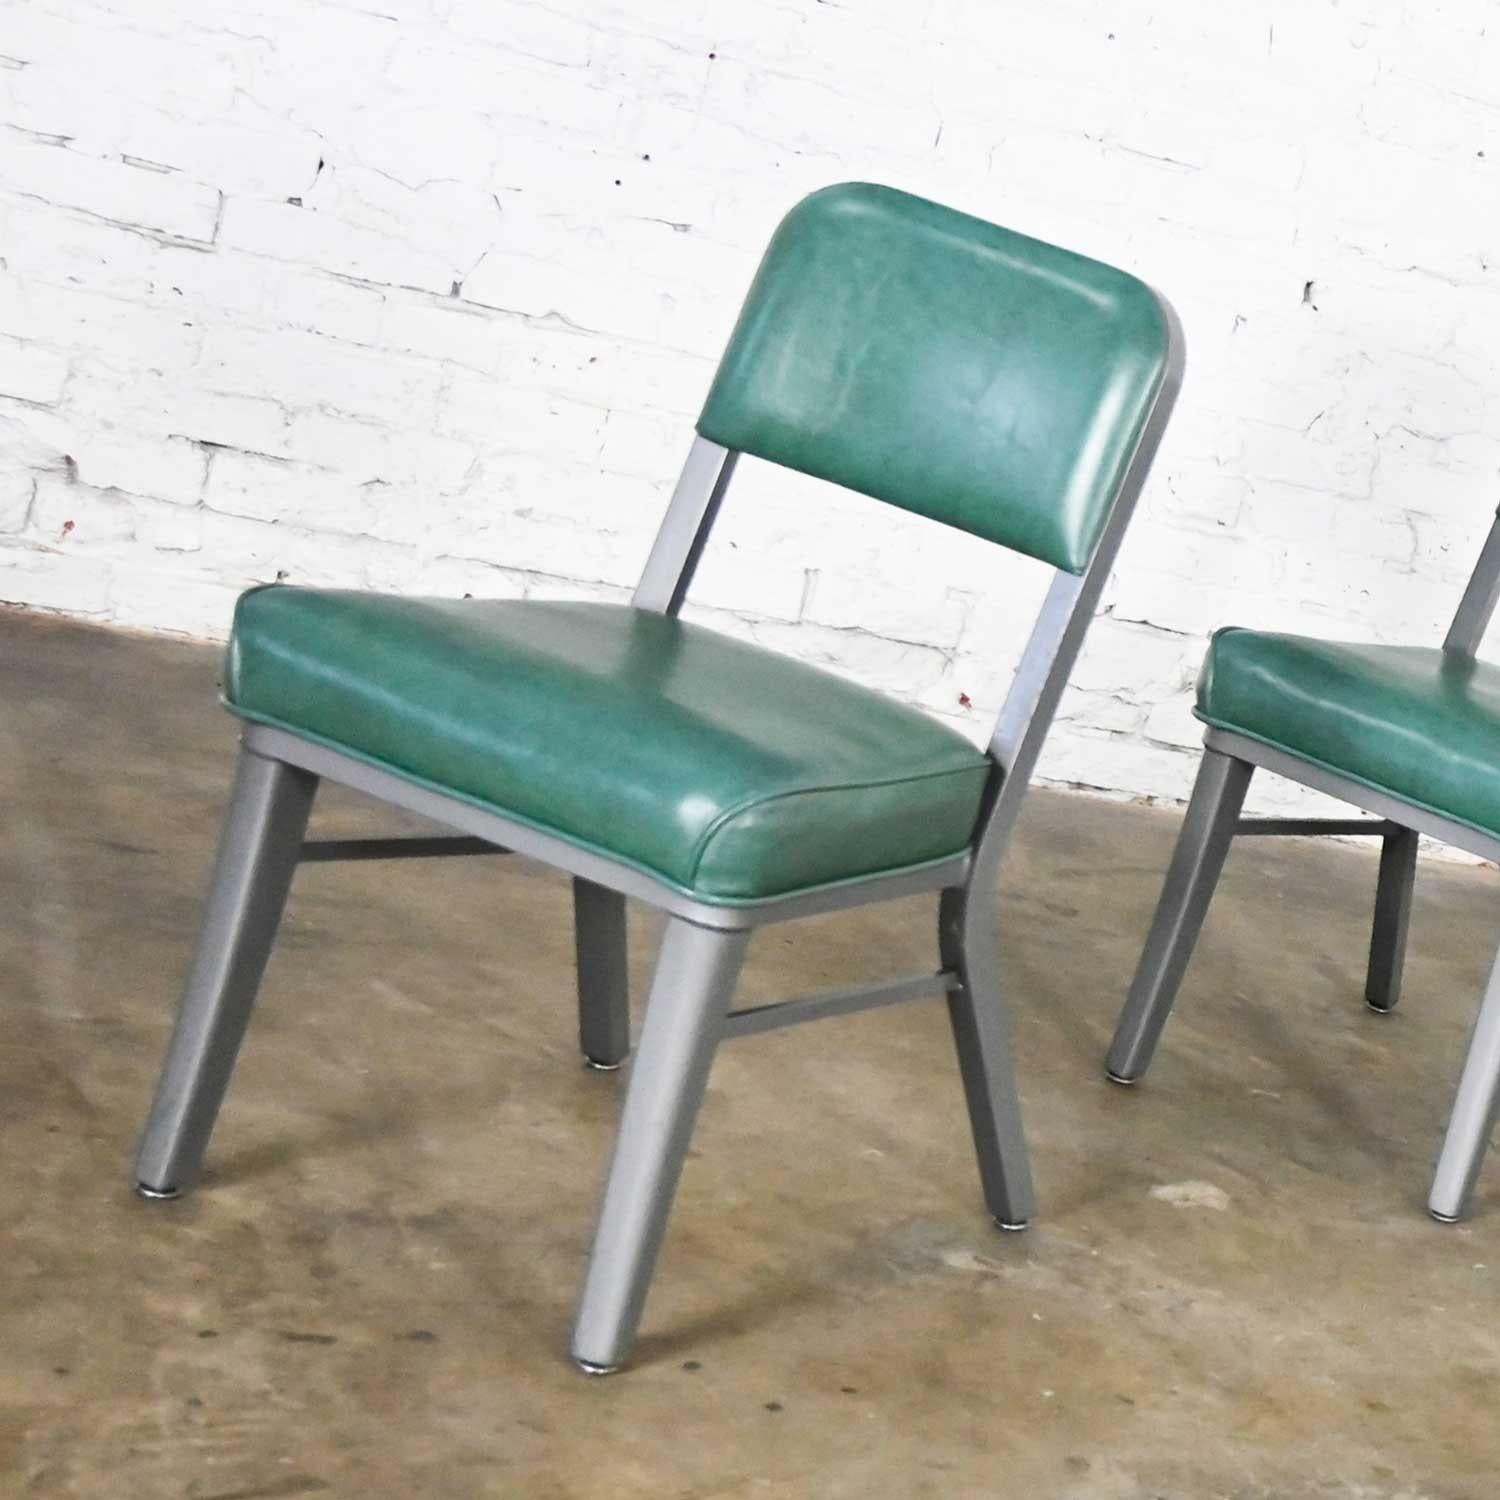 Streamline Industrial Metal & Green Vinyl Faux Leather Dining Chairs Set of 6 1